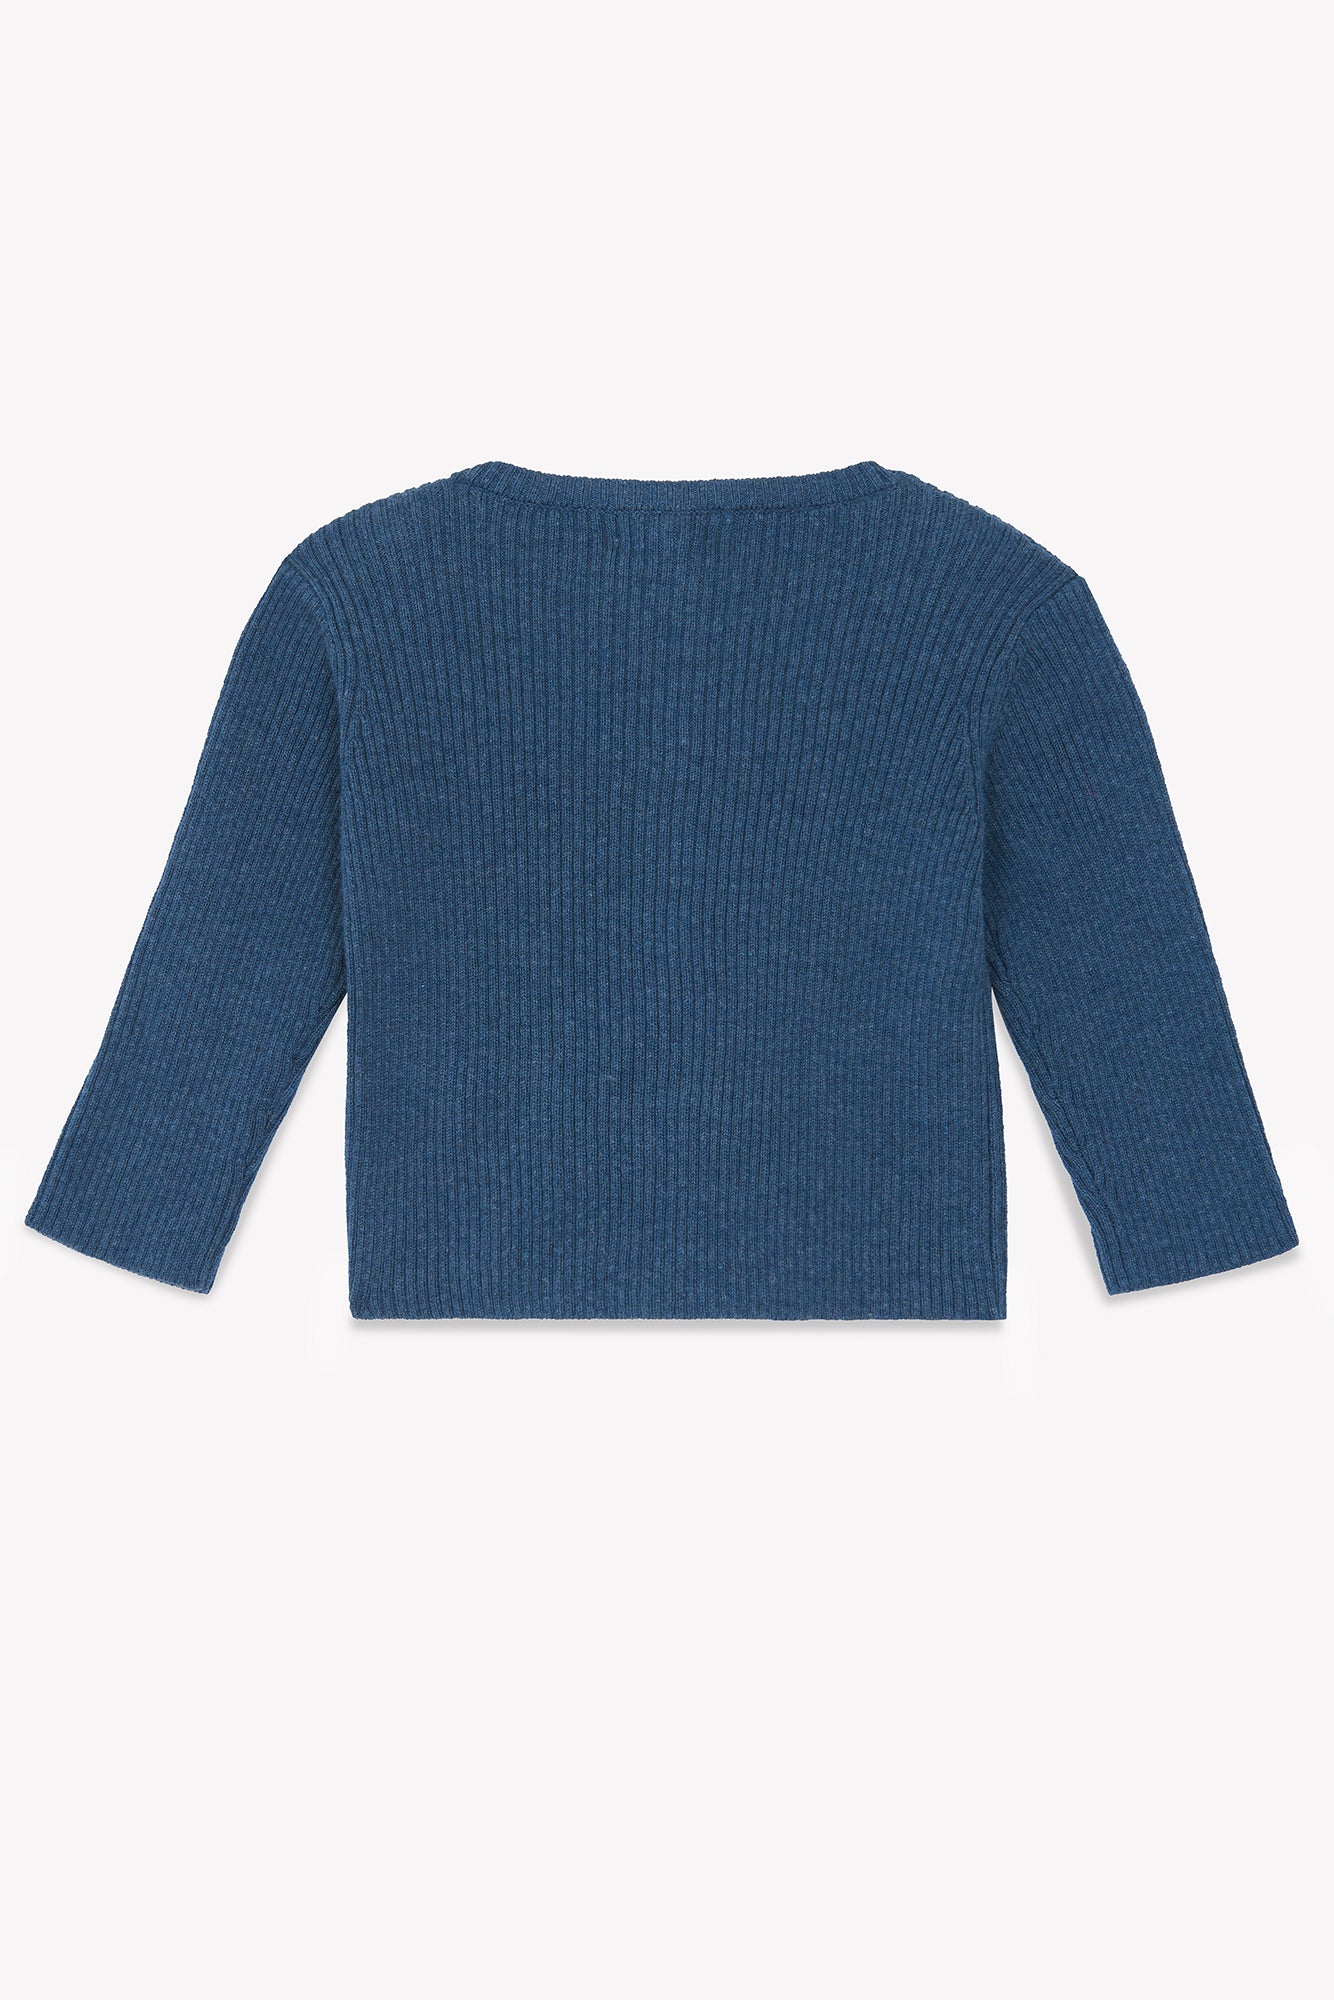 Cardigan - Blue Baby in a knit